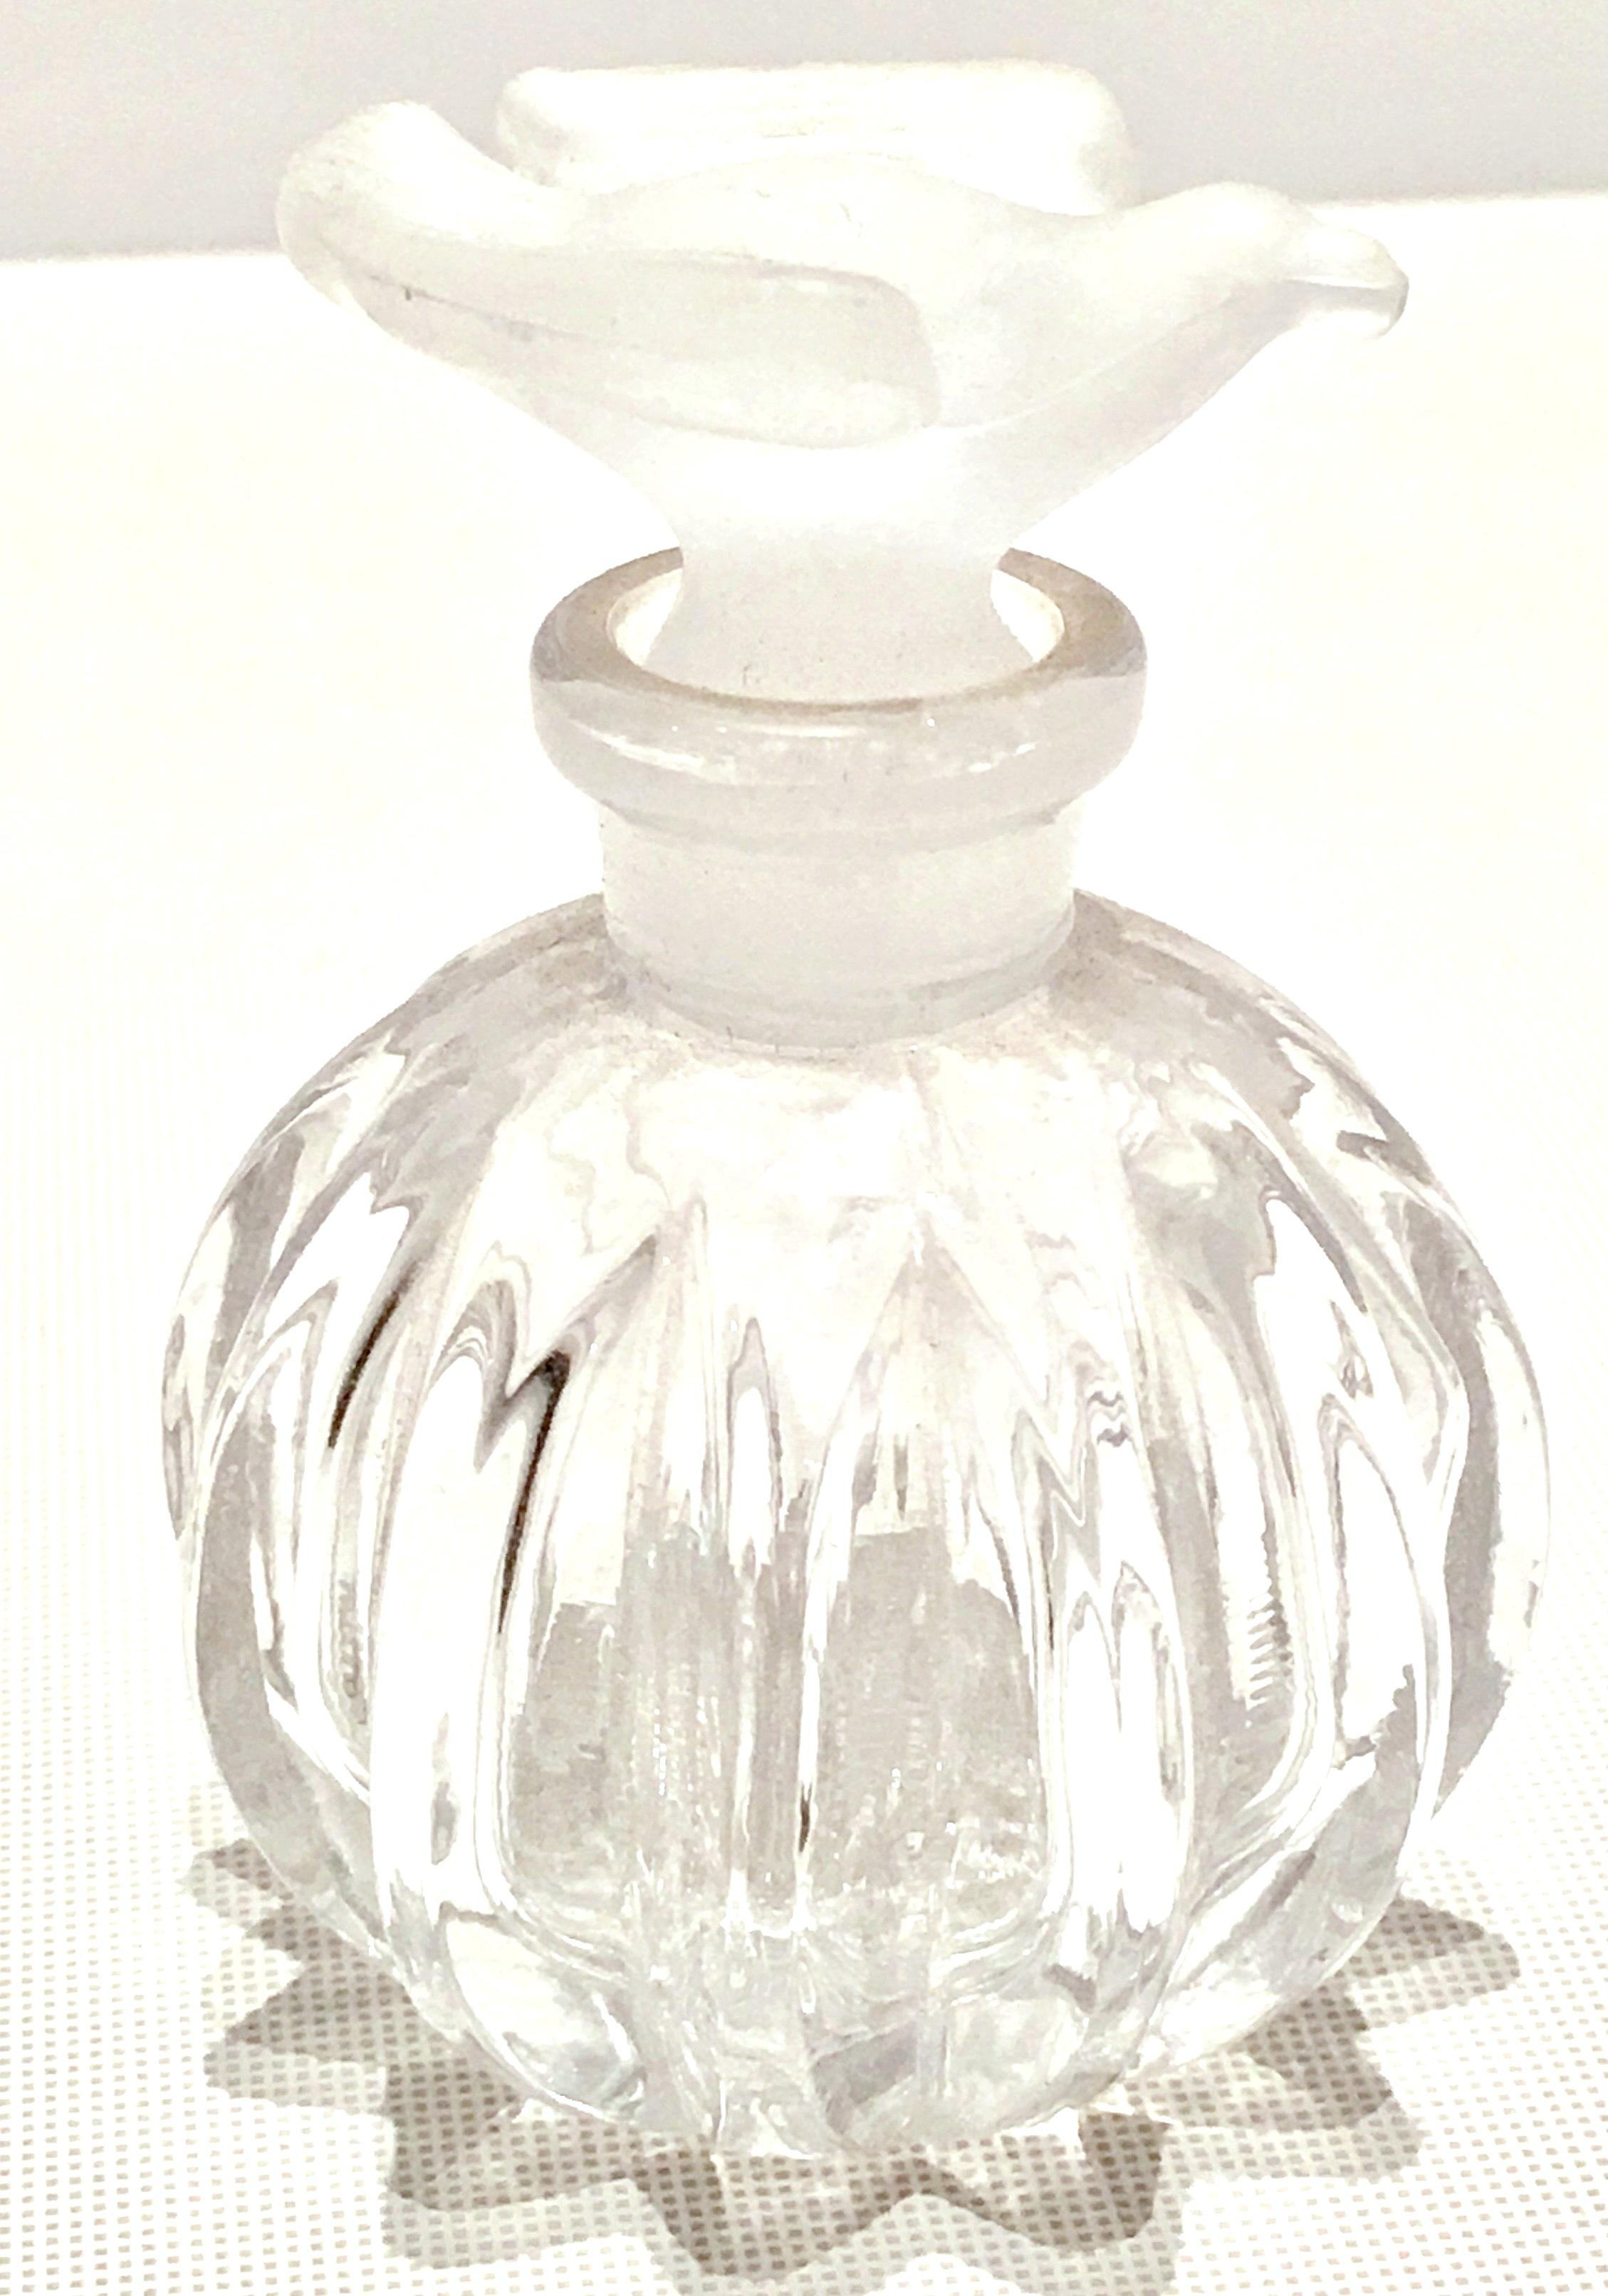 Vintage Iconic Lalique crystal perfume decanter for Nina Ricci L'Air du Temps perfume. Features an optic crystal clear cut body and frosted dove motif stopper.